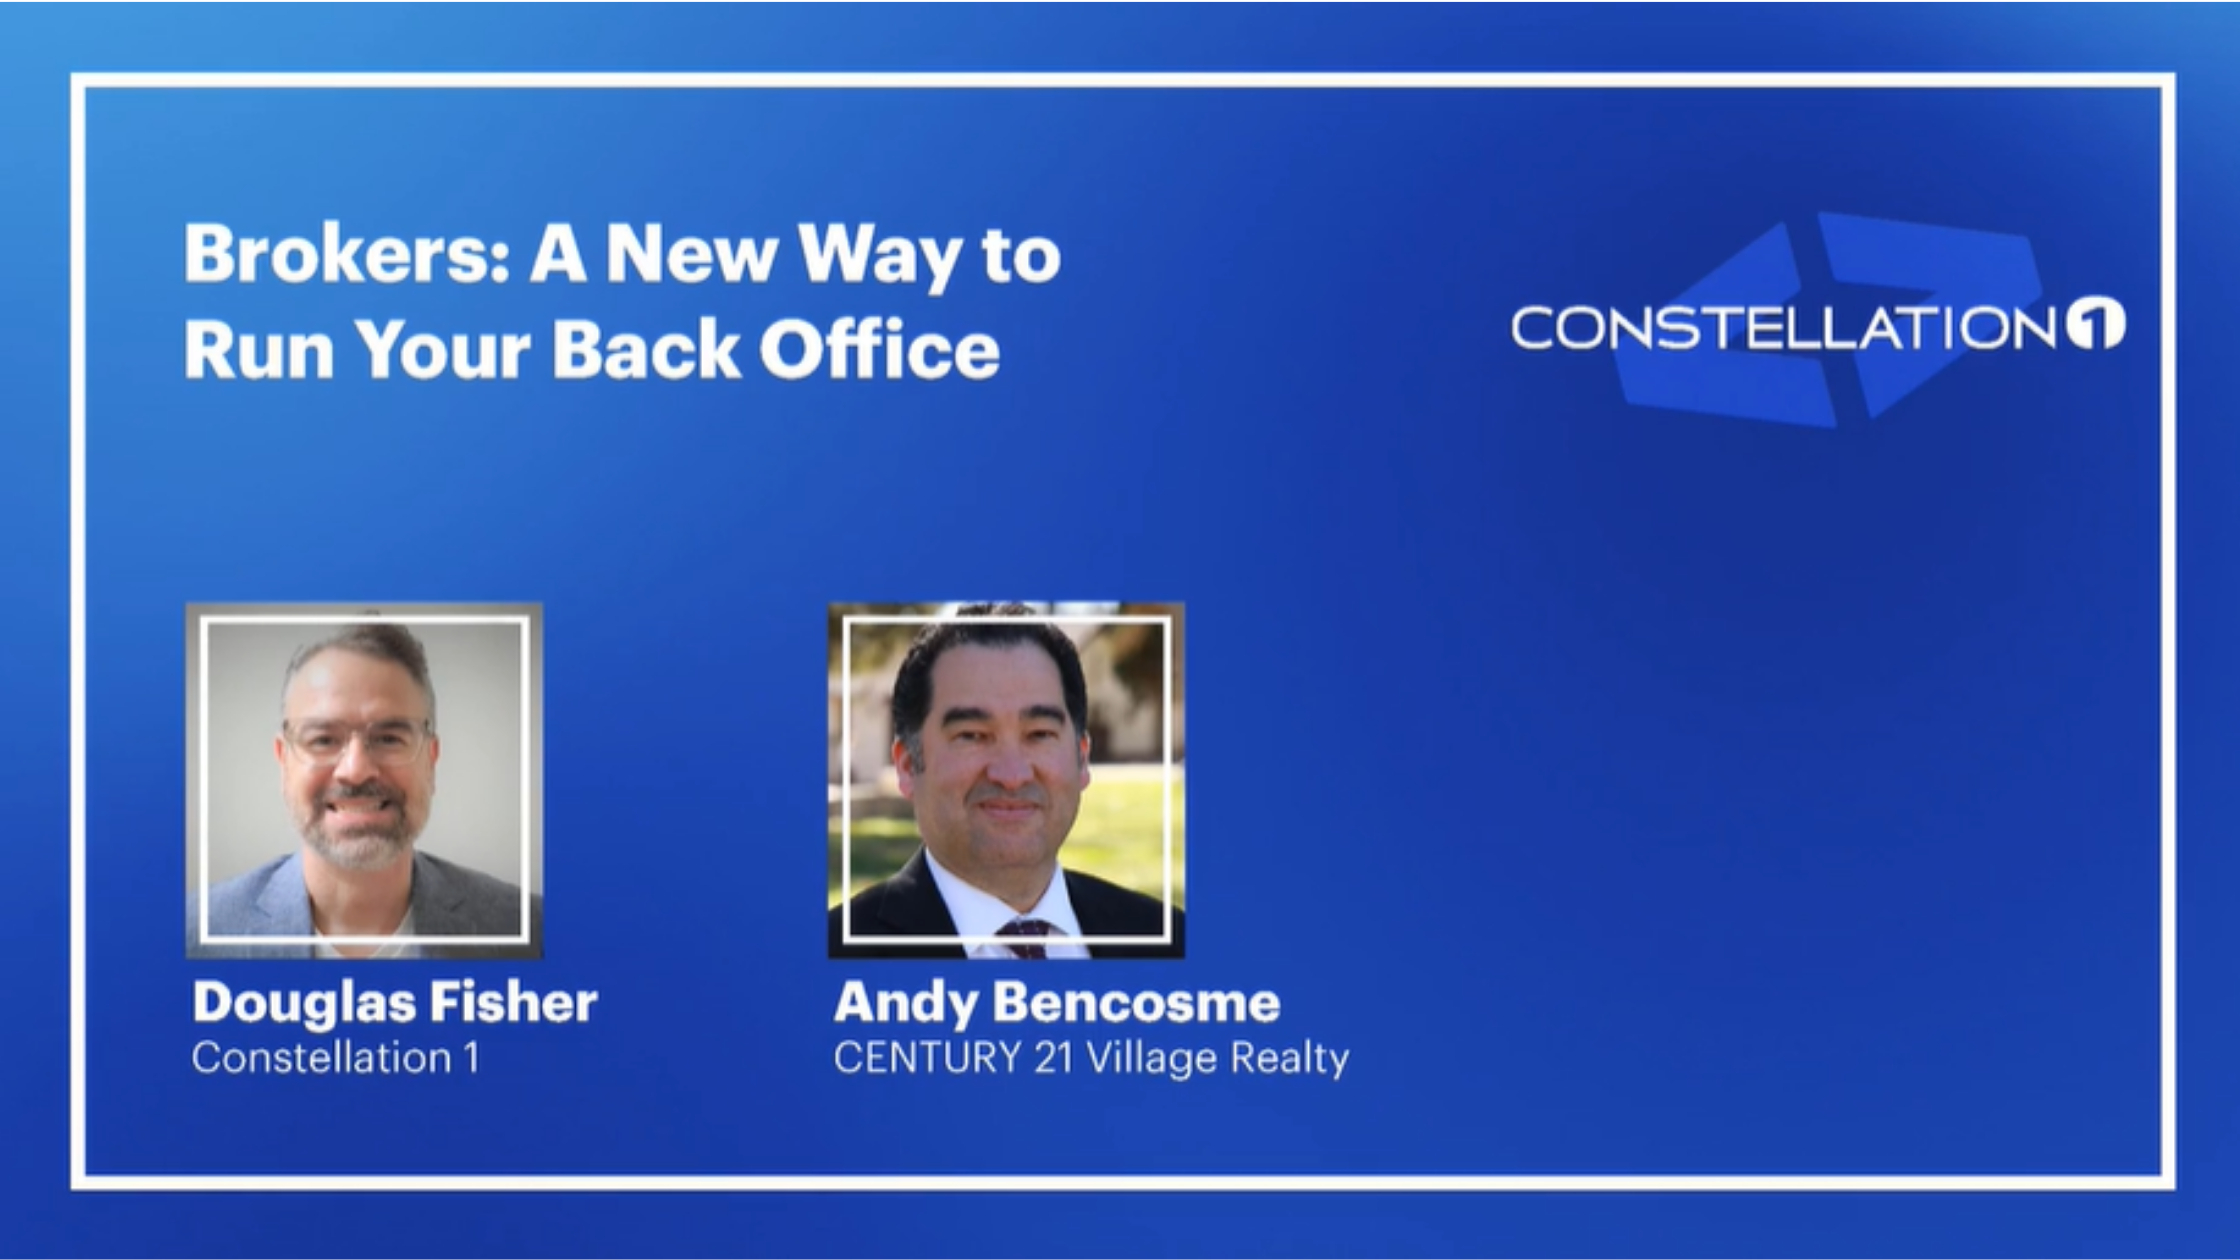 con1 new way to run back office